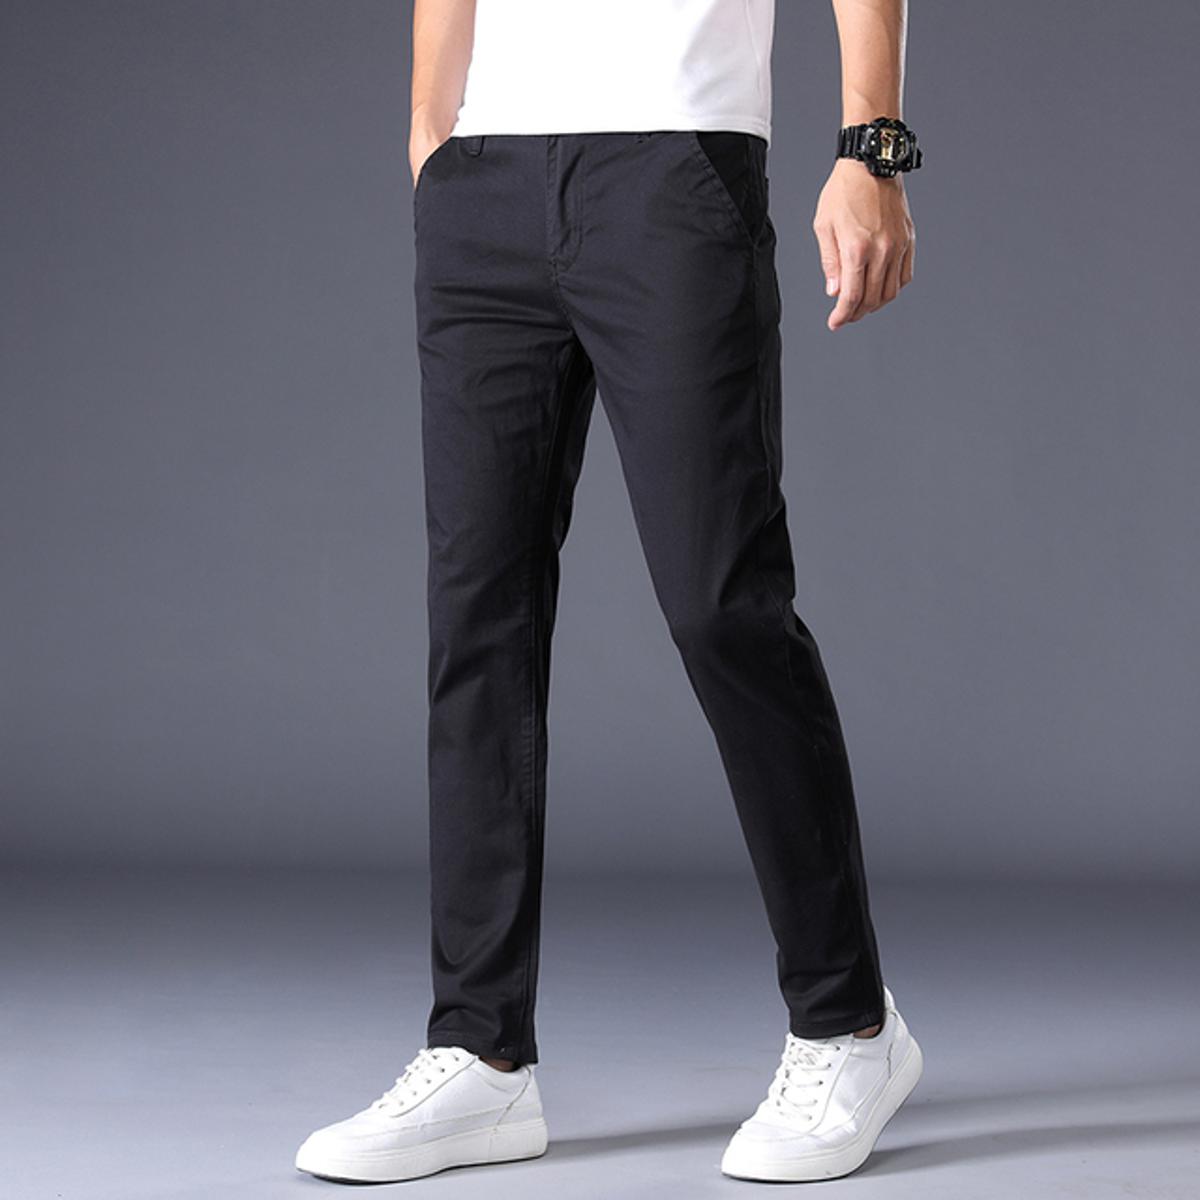 Pants For Men – Cotton Jeans For Men In All Colors – Mens Cotton Pants – Cotton Jeans Pants For Men